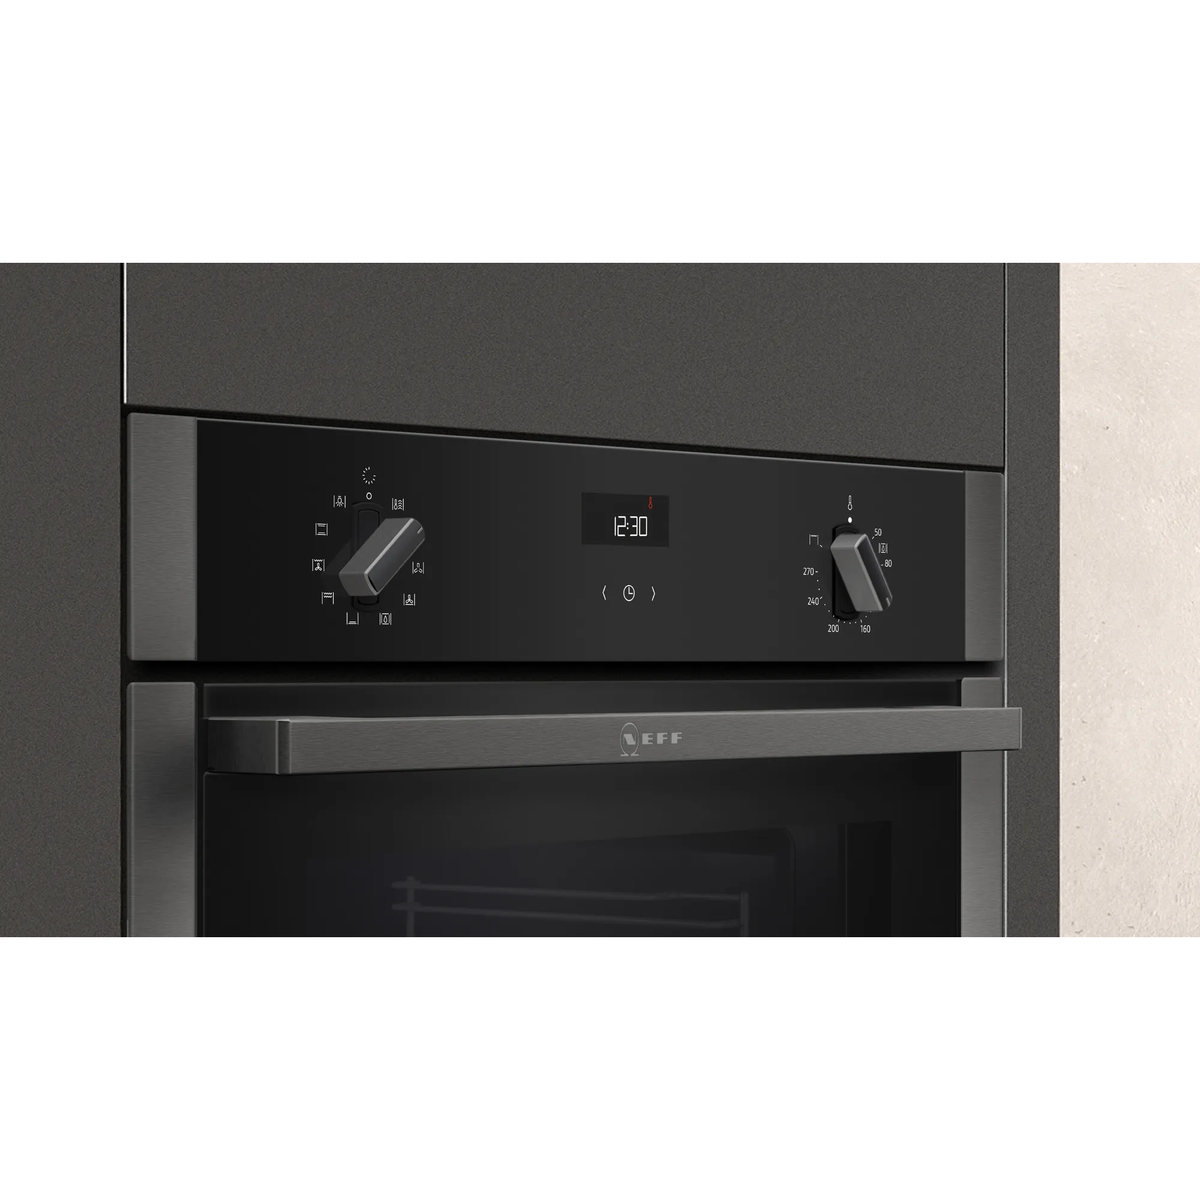 Neff N 50 71L Built-In Electric Single Oven - Graphite Grey | B3ACE4HG0B from Neff - DID Electrical